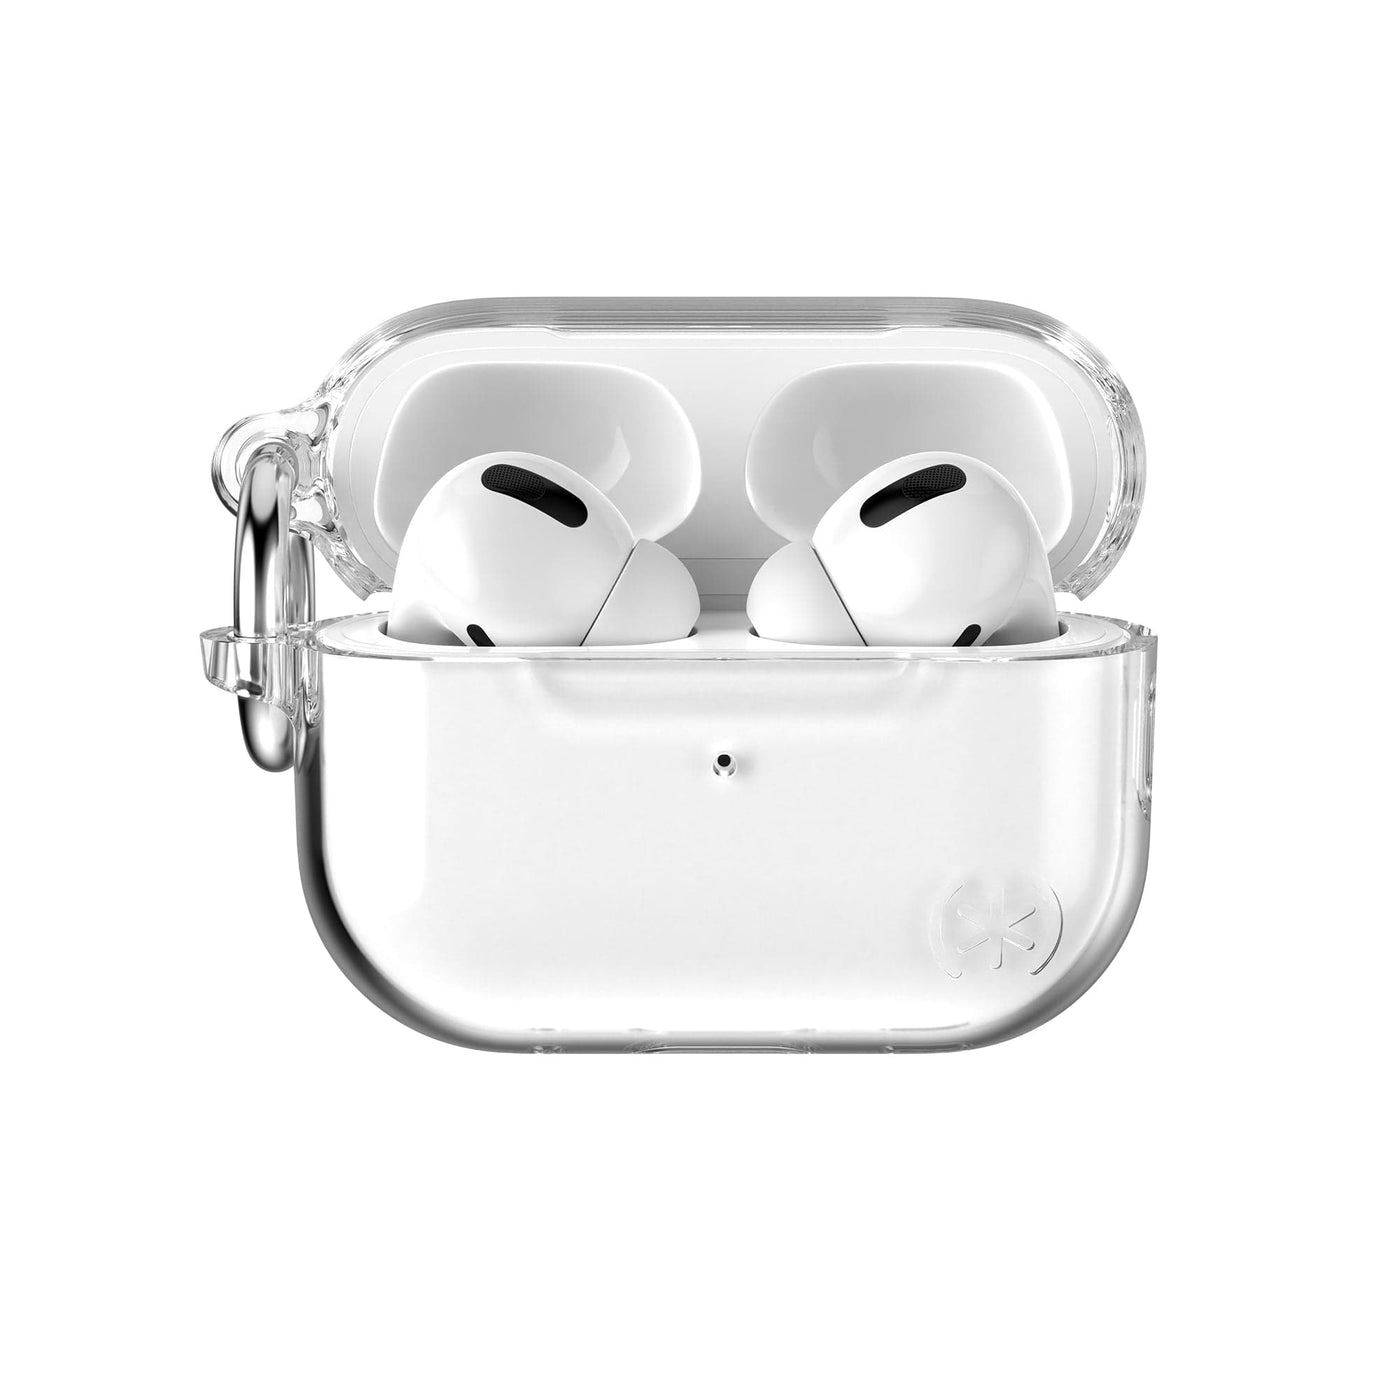  Case for Airpods Pro 2nd Generation - VISOOM Airpods